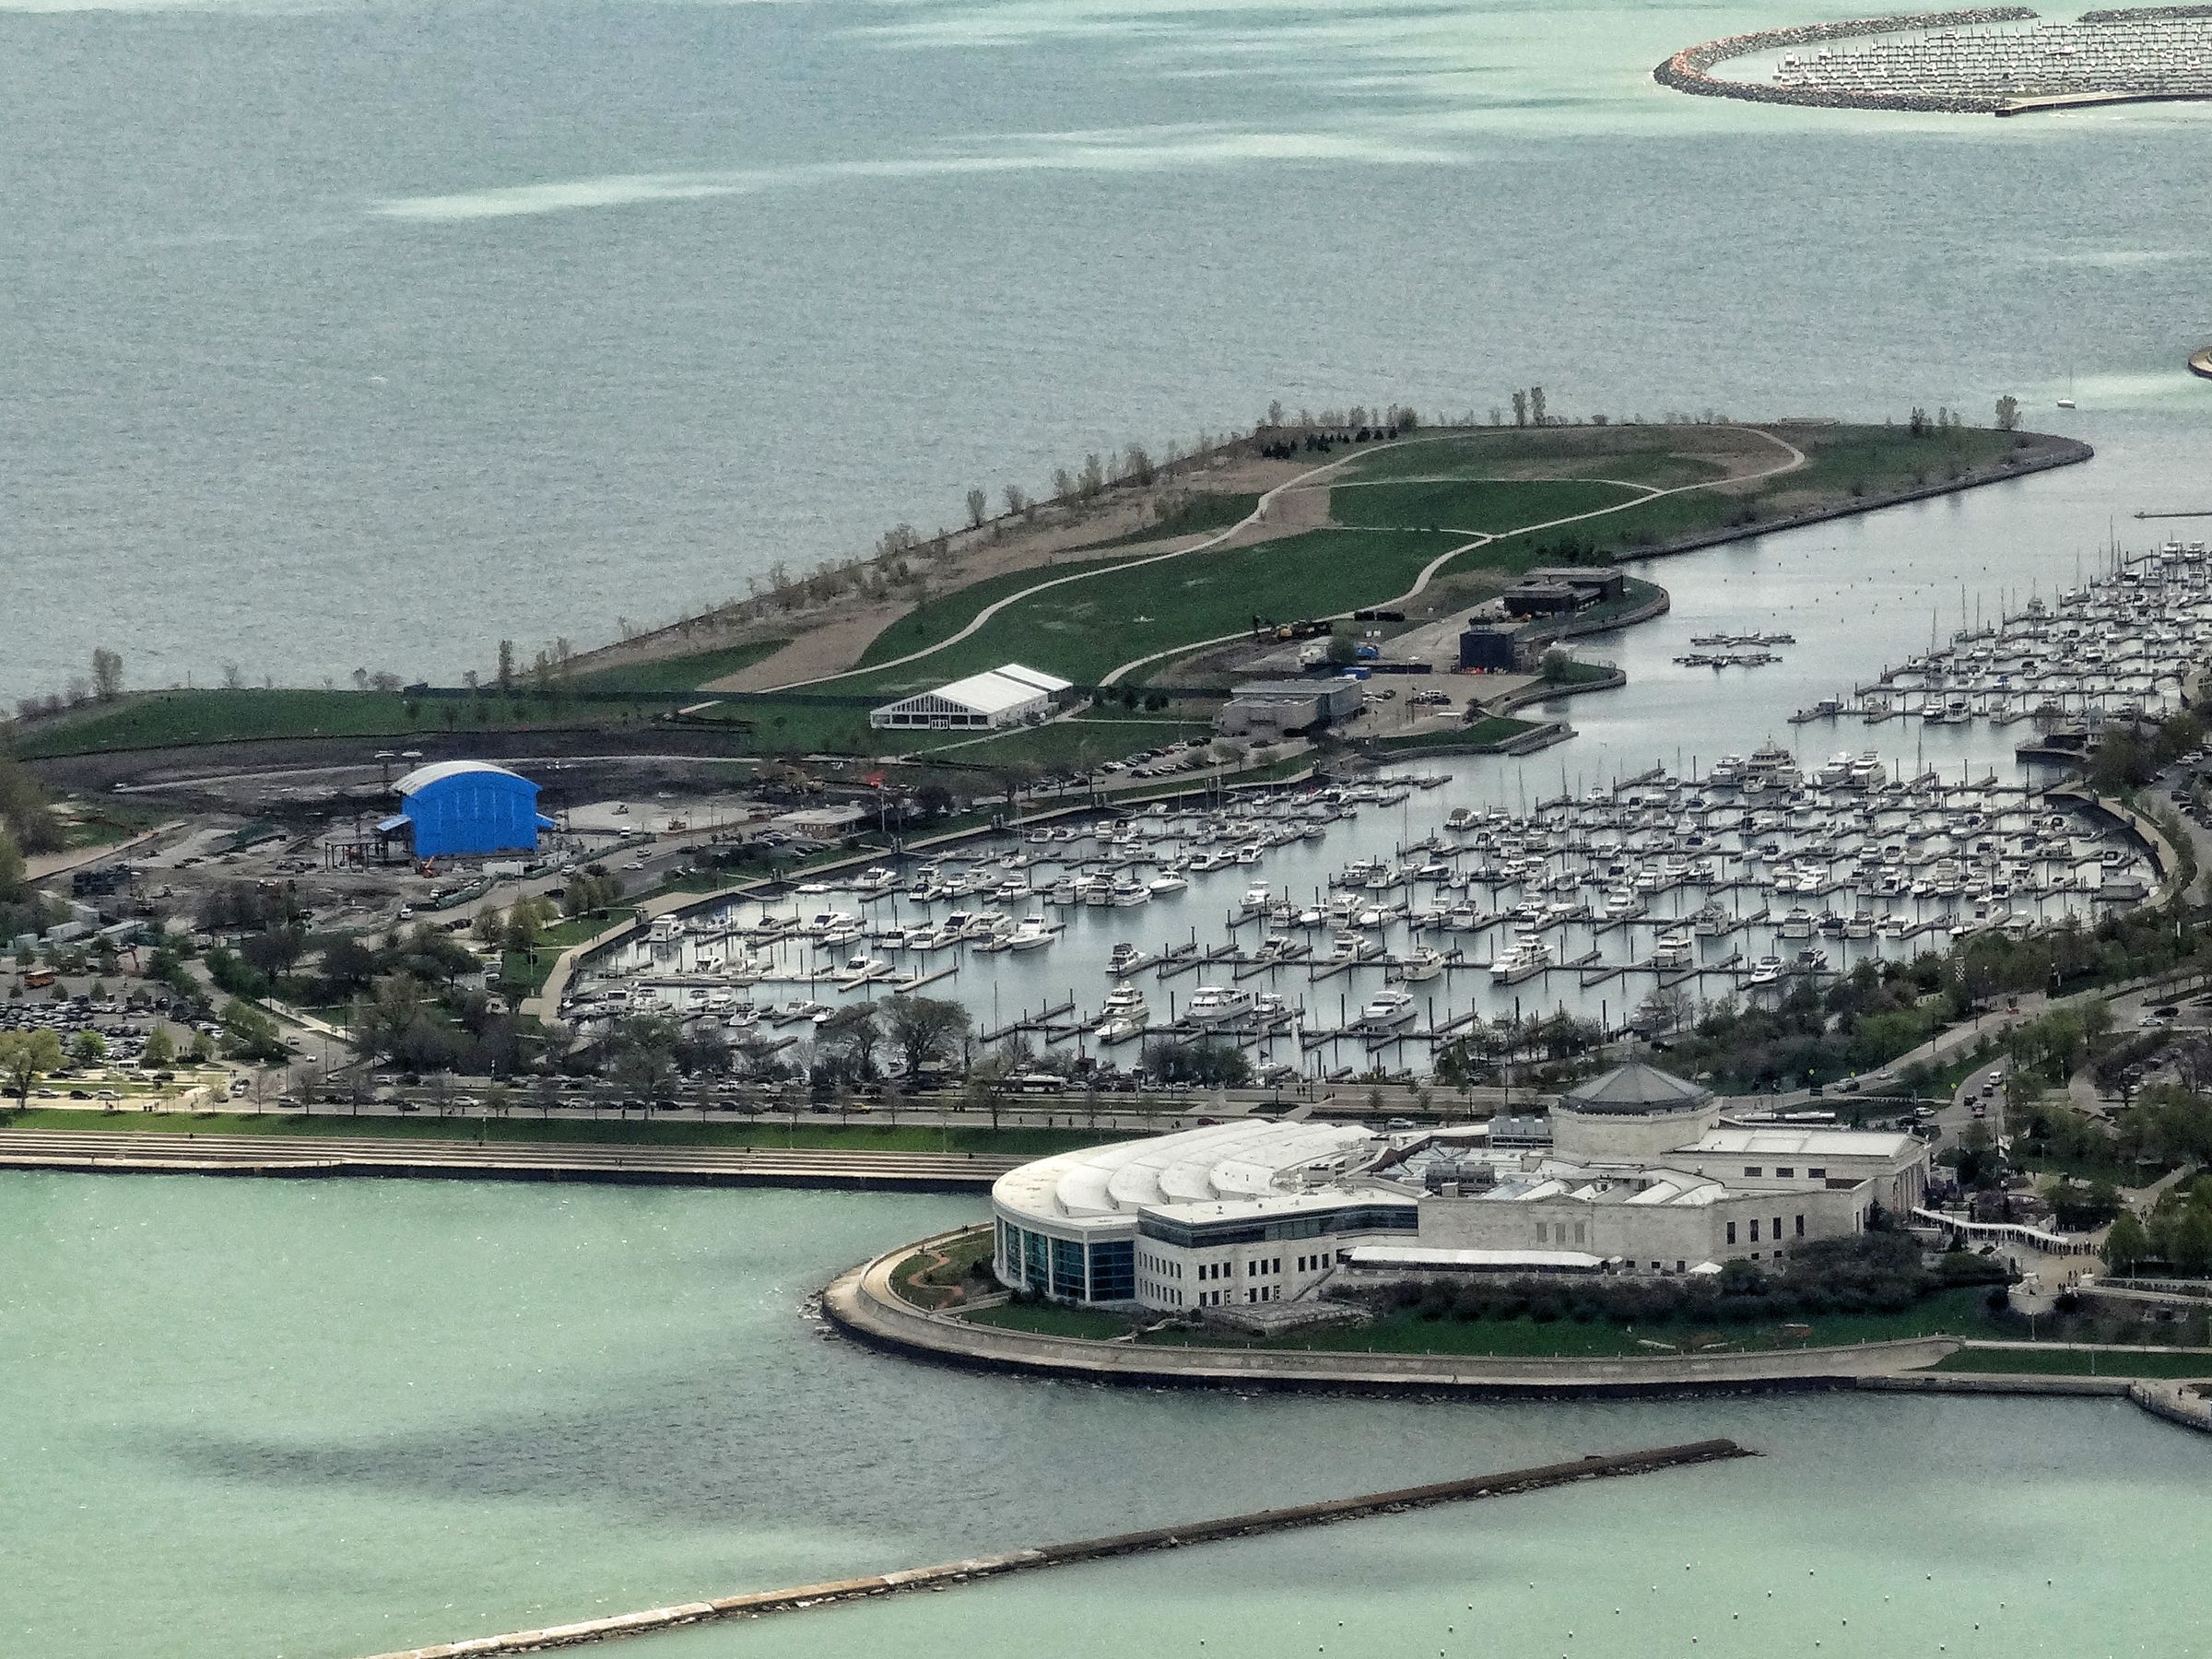 The Shedd Aquarium, Northerly Island, and Burnham Harbor in Chicago seen from the 80th floor at 200 East Randolph Street.